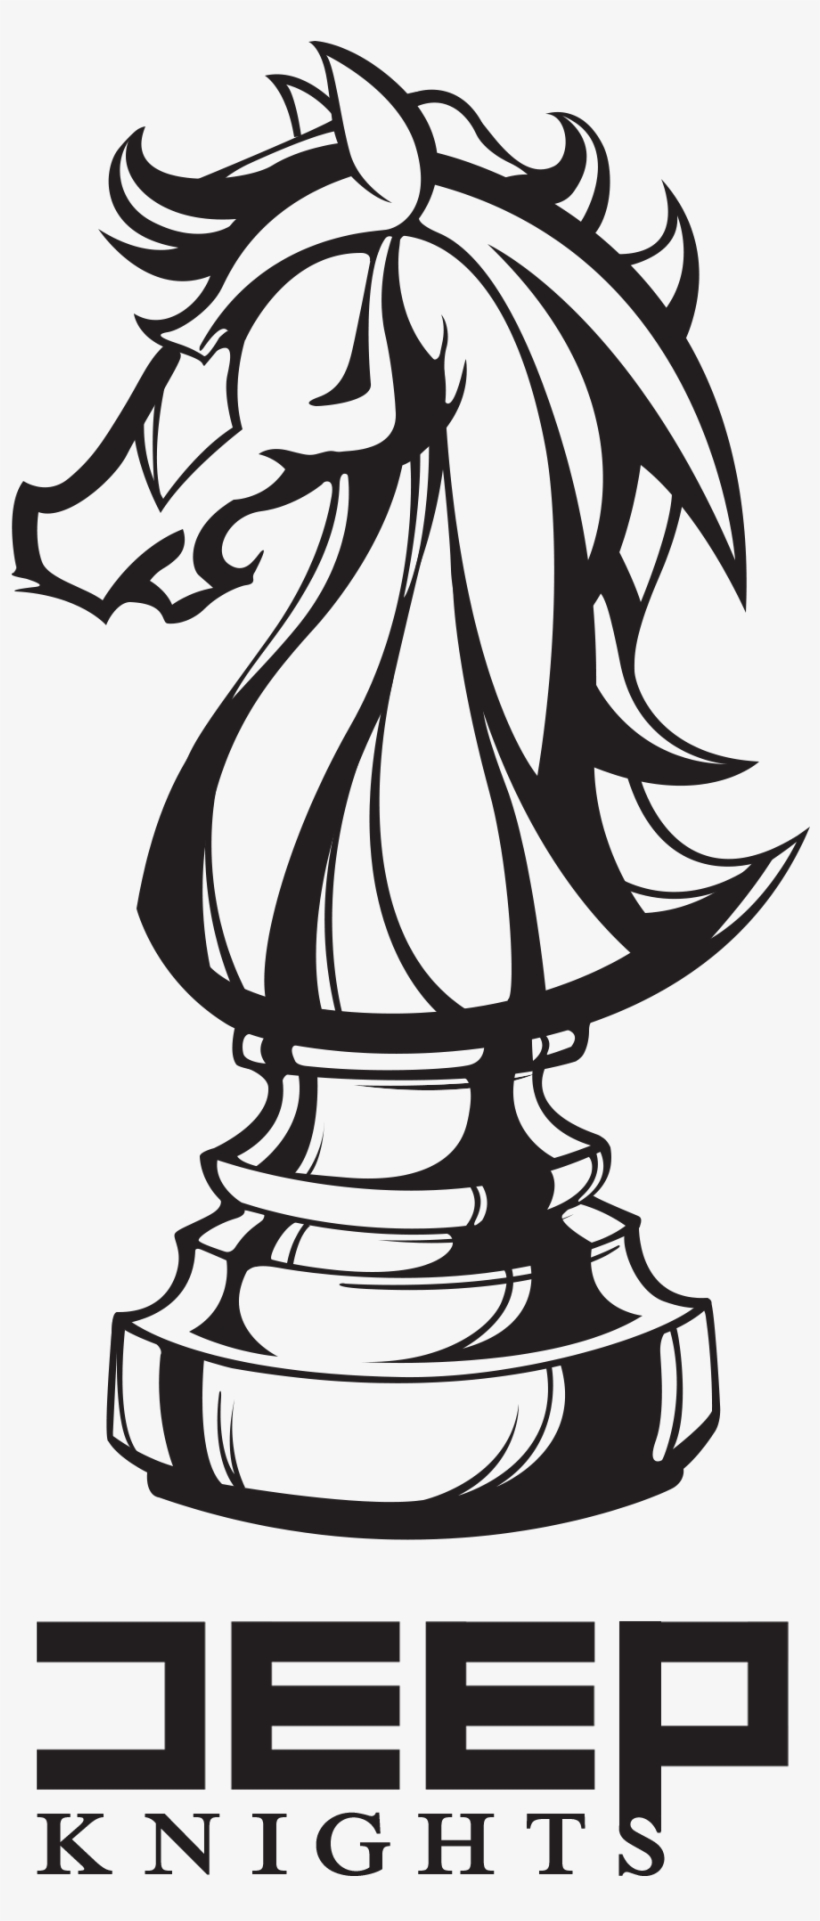 Chess Queen Black and White Tattoo Designs - Ace Tattooz